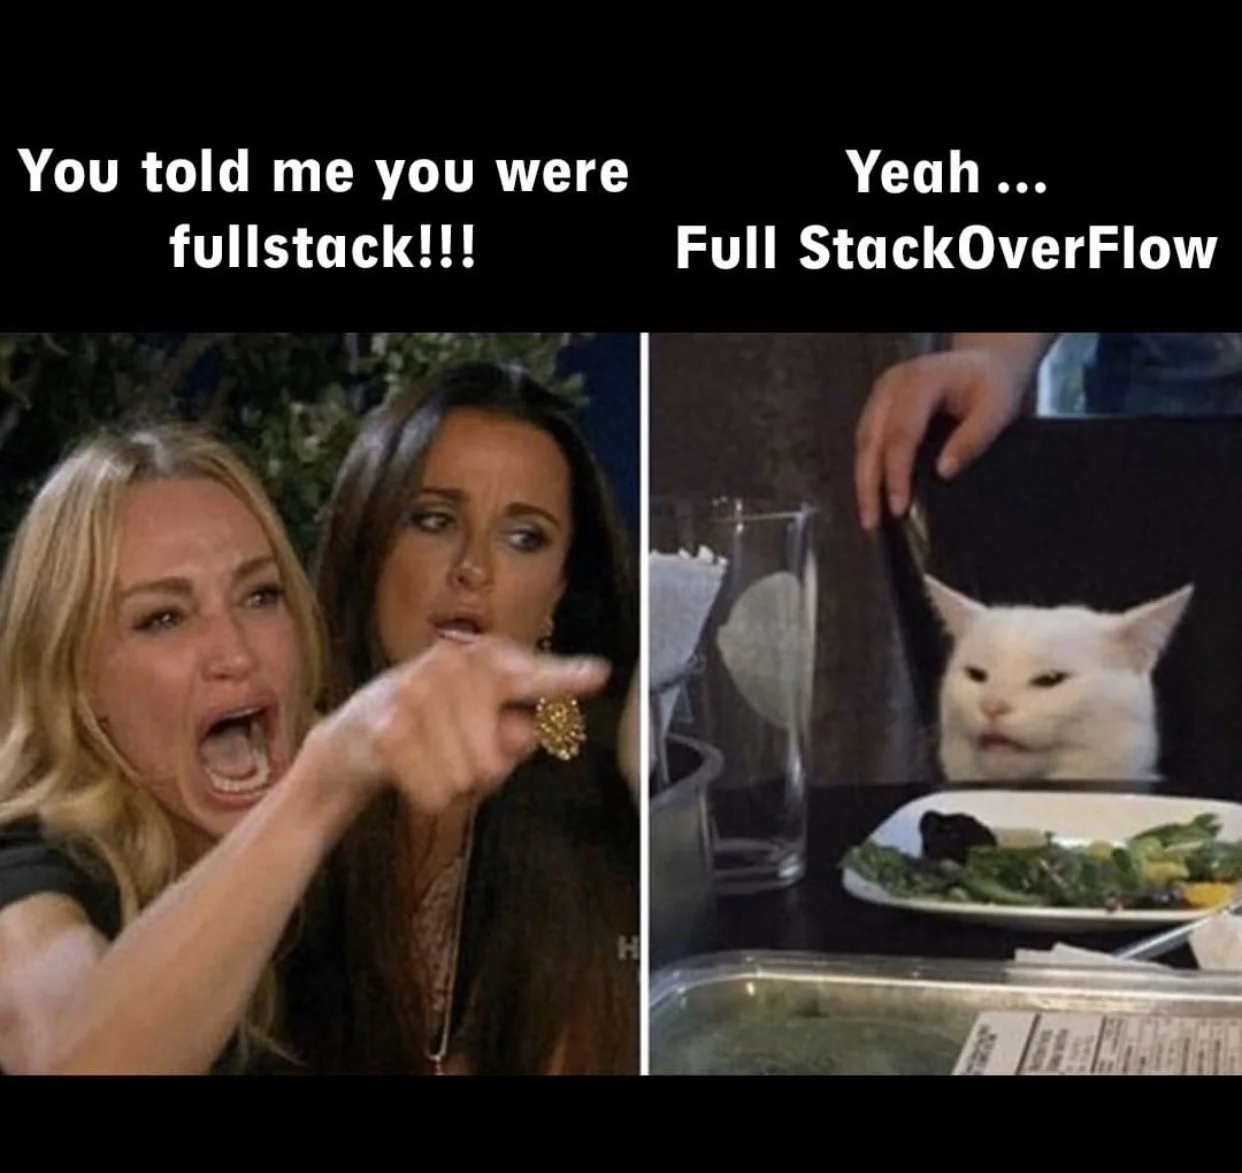 Meme of woman with accusing face telling cat “You told me you were fullstack!” and cat responds “Yeah…full stackoverflow”